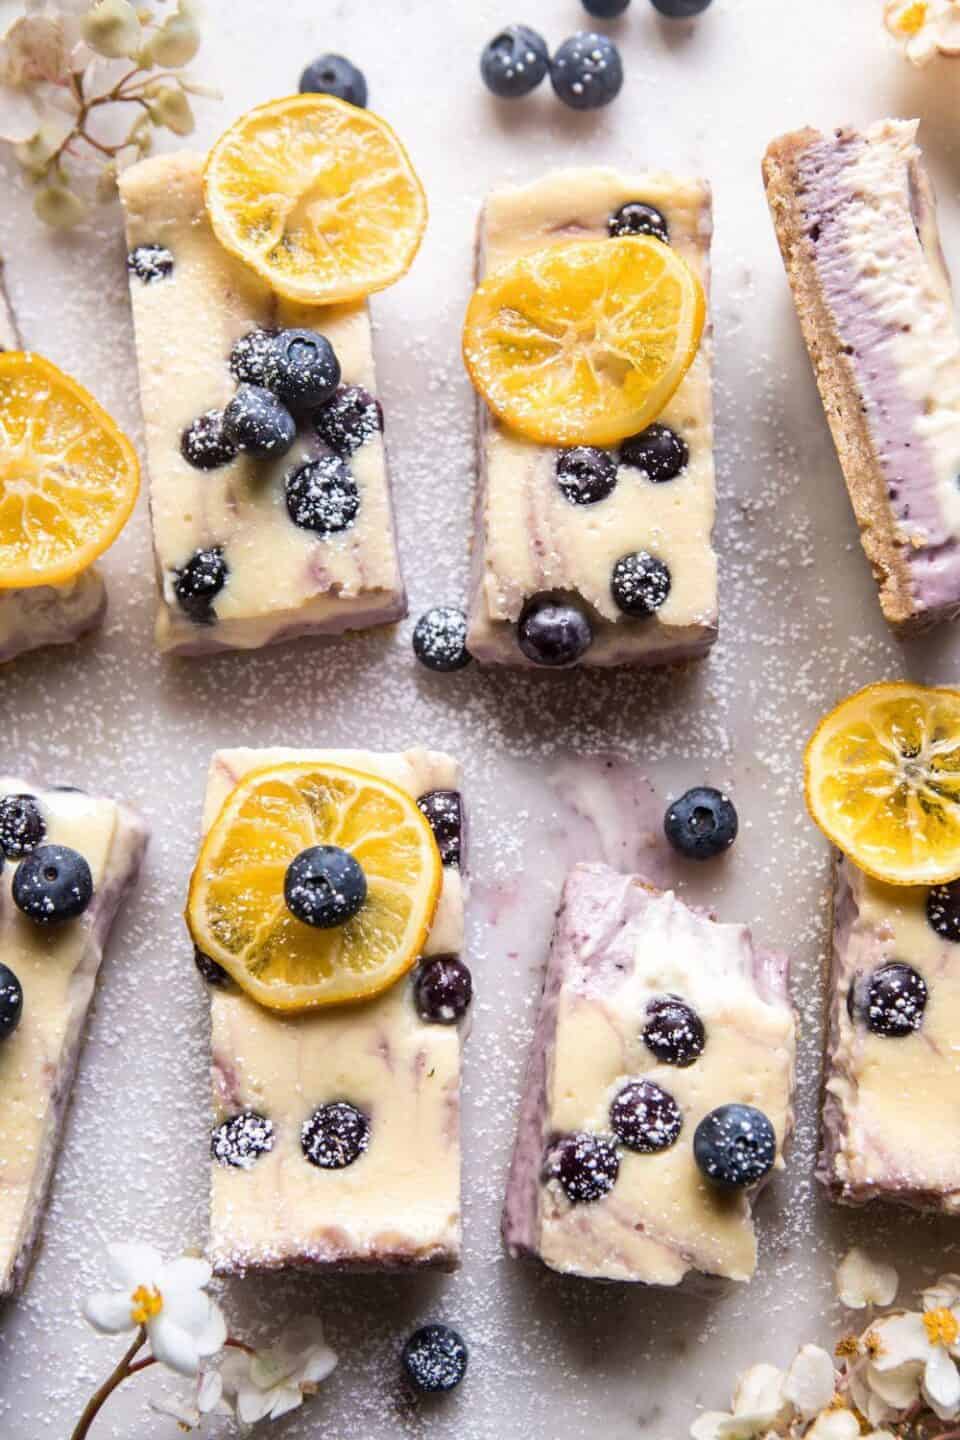 Blueberry Lemon Cheesecake Bars with Candied Lemon